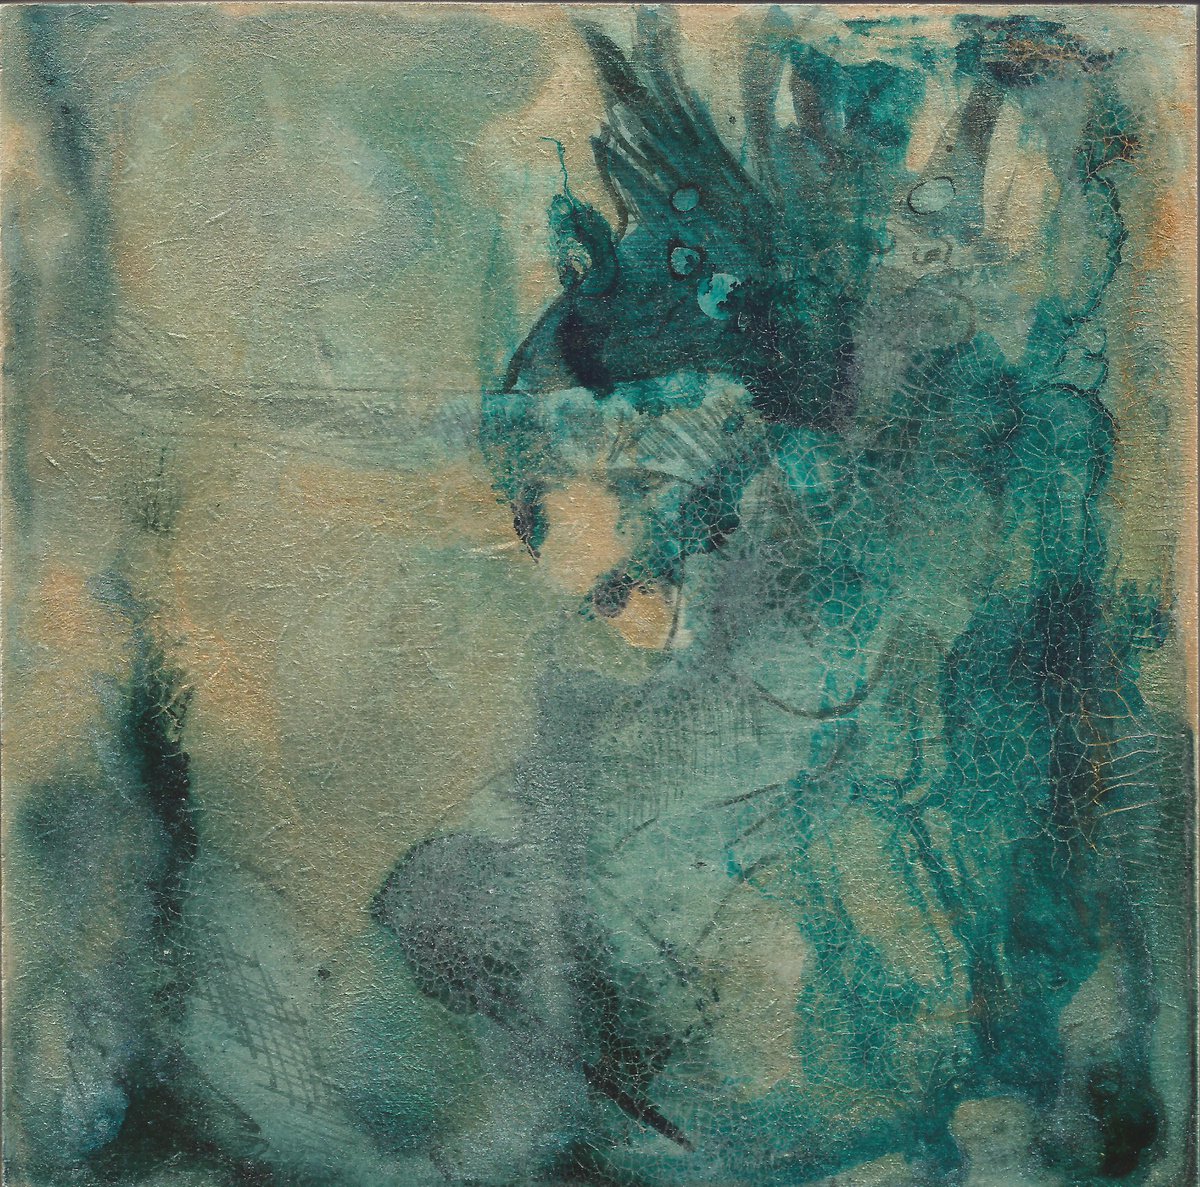 Dance, abstract figurative underwater painting by Dianne Bowell